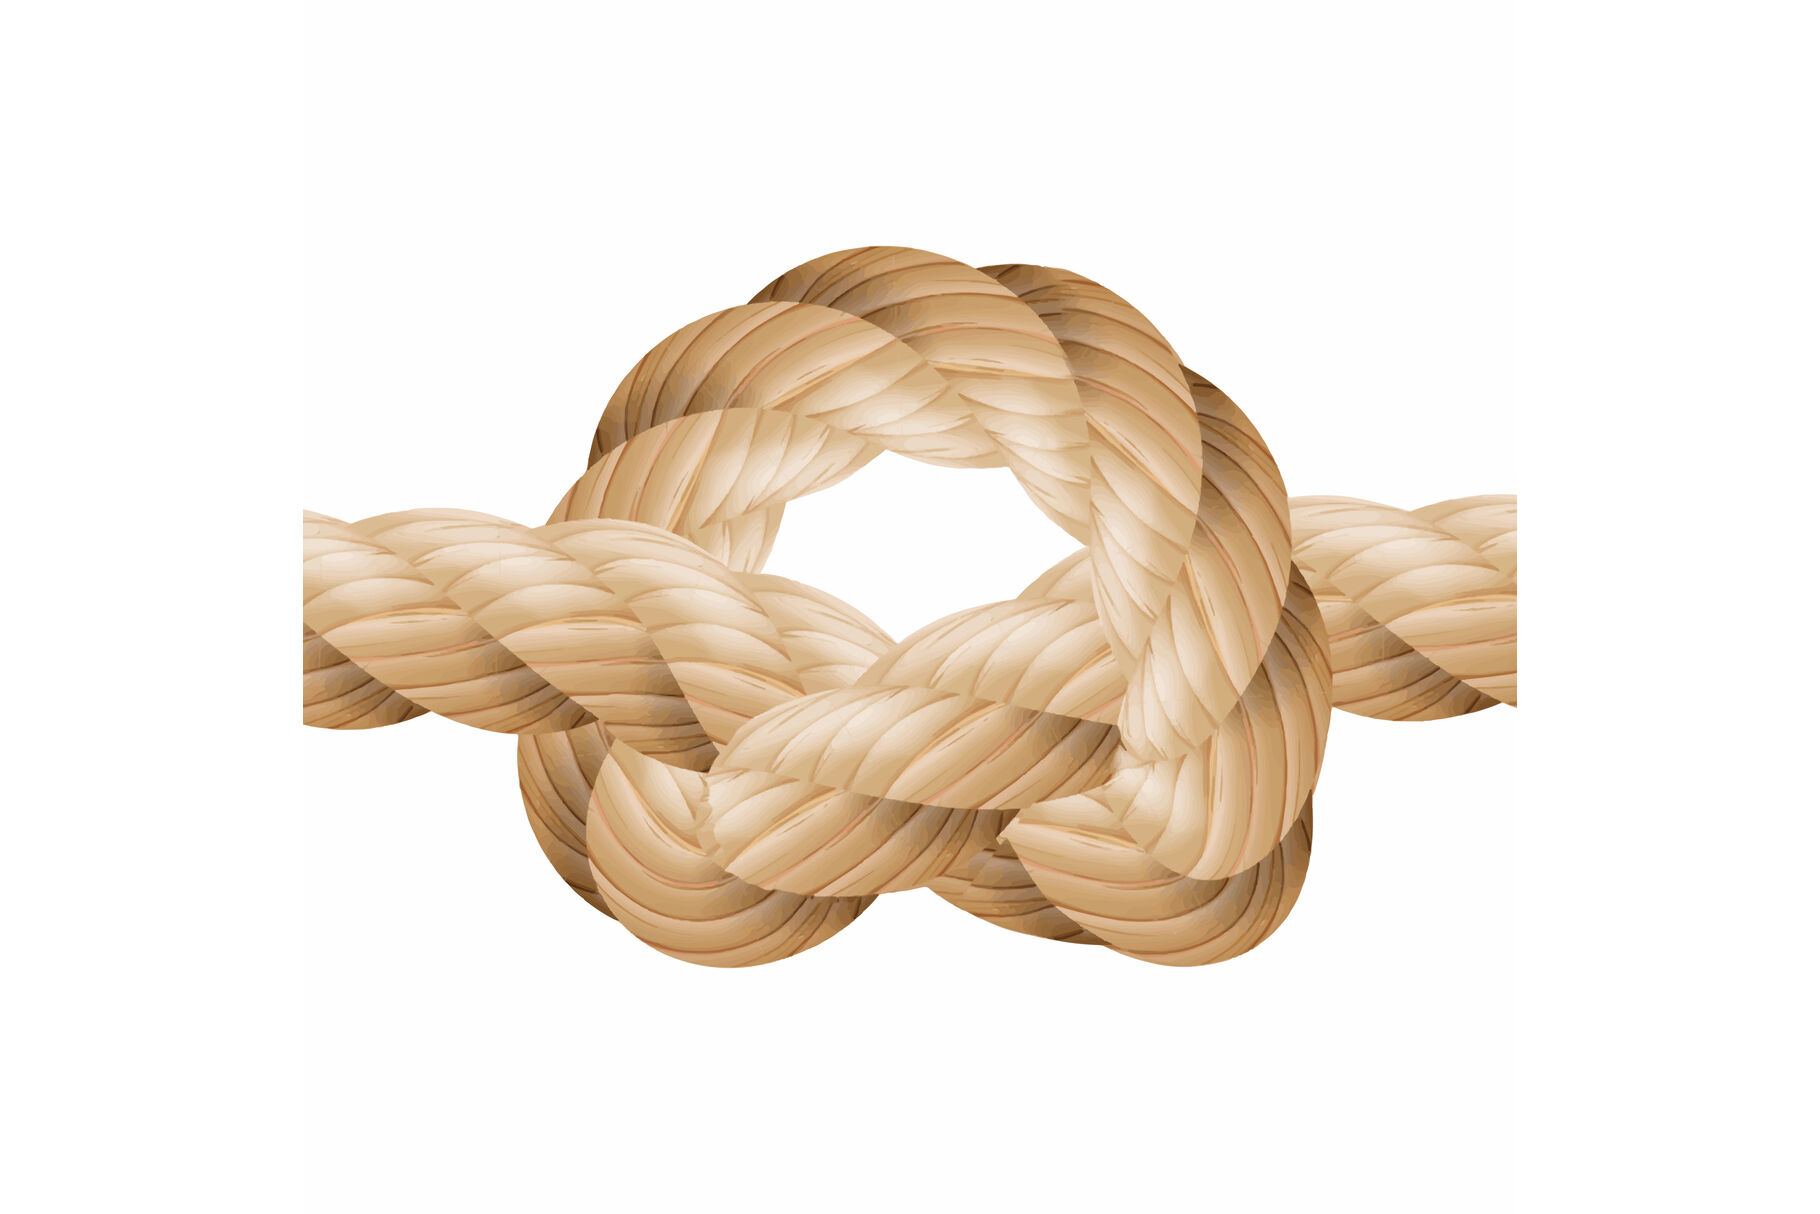 Rope Knot Vector. Marine Rope Knot. Isolated On White Background. For  Fabric, Wallpaper, Wrapping. Figure 8, Overhand. By Pikepicture